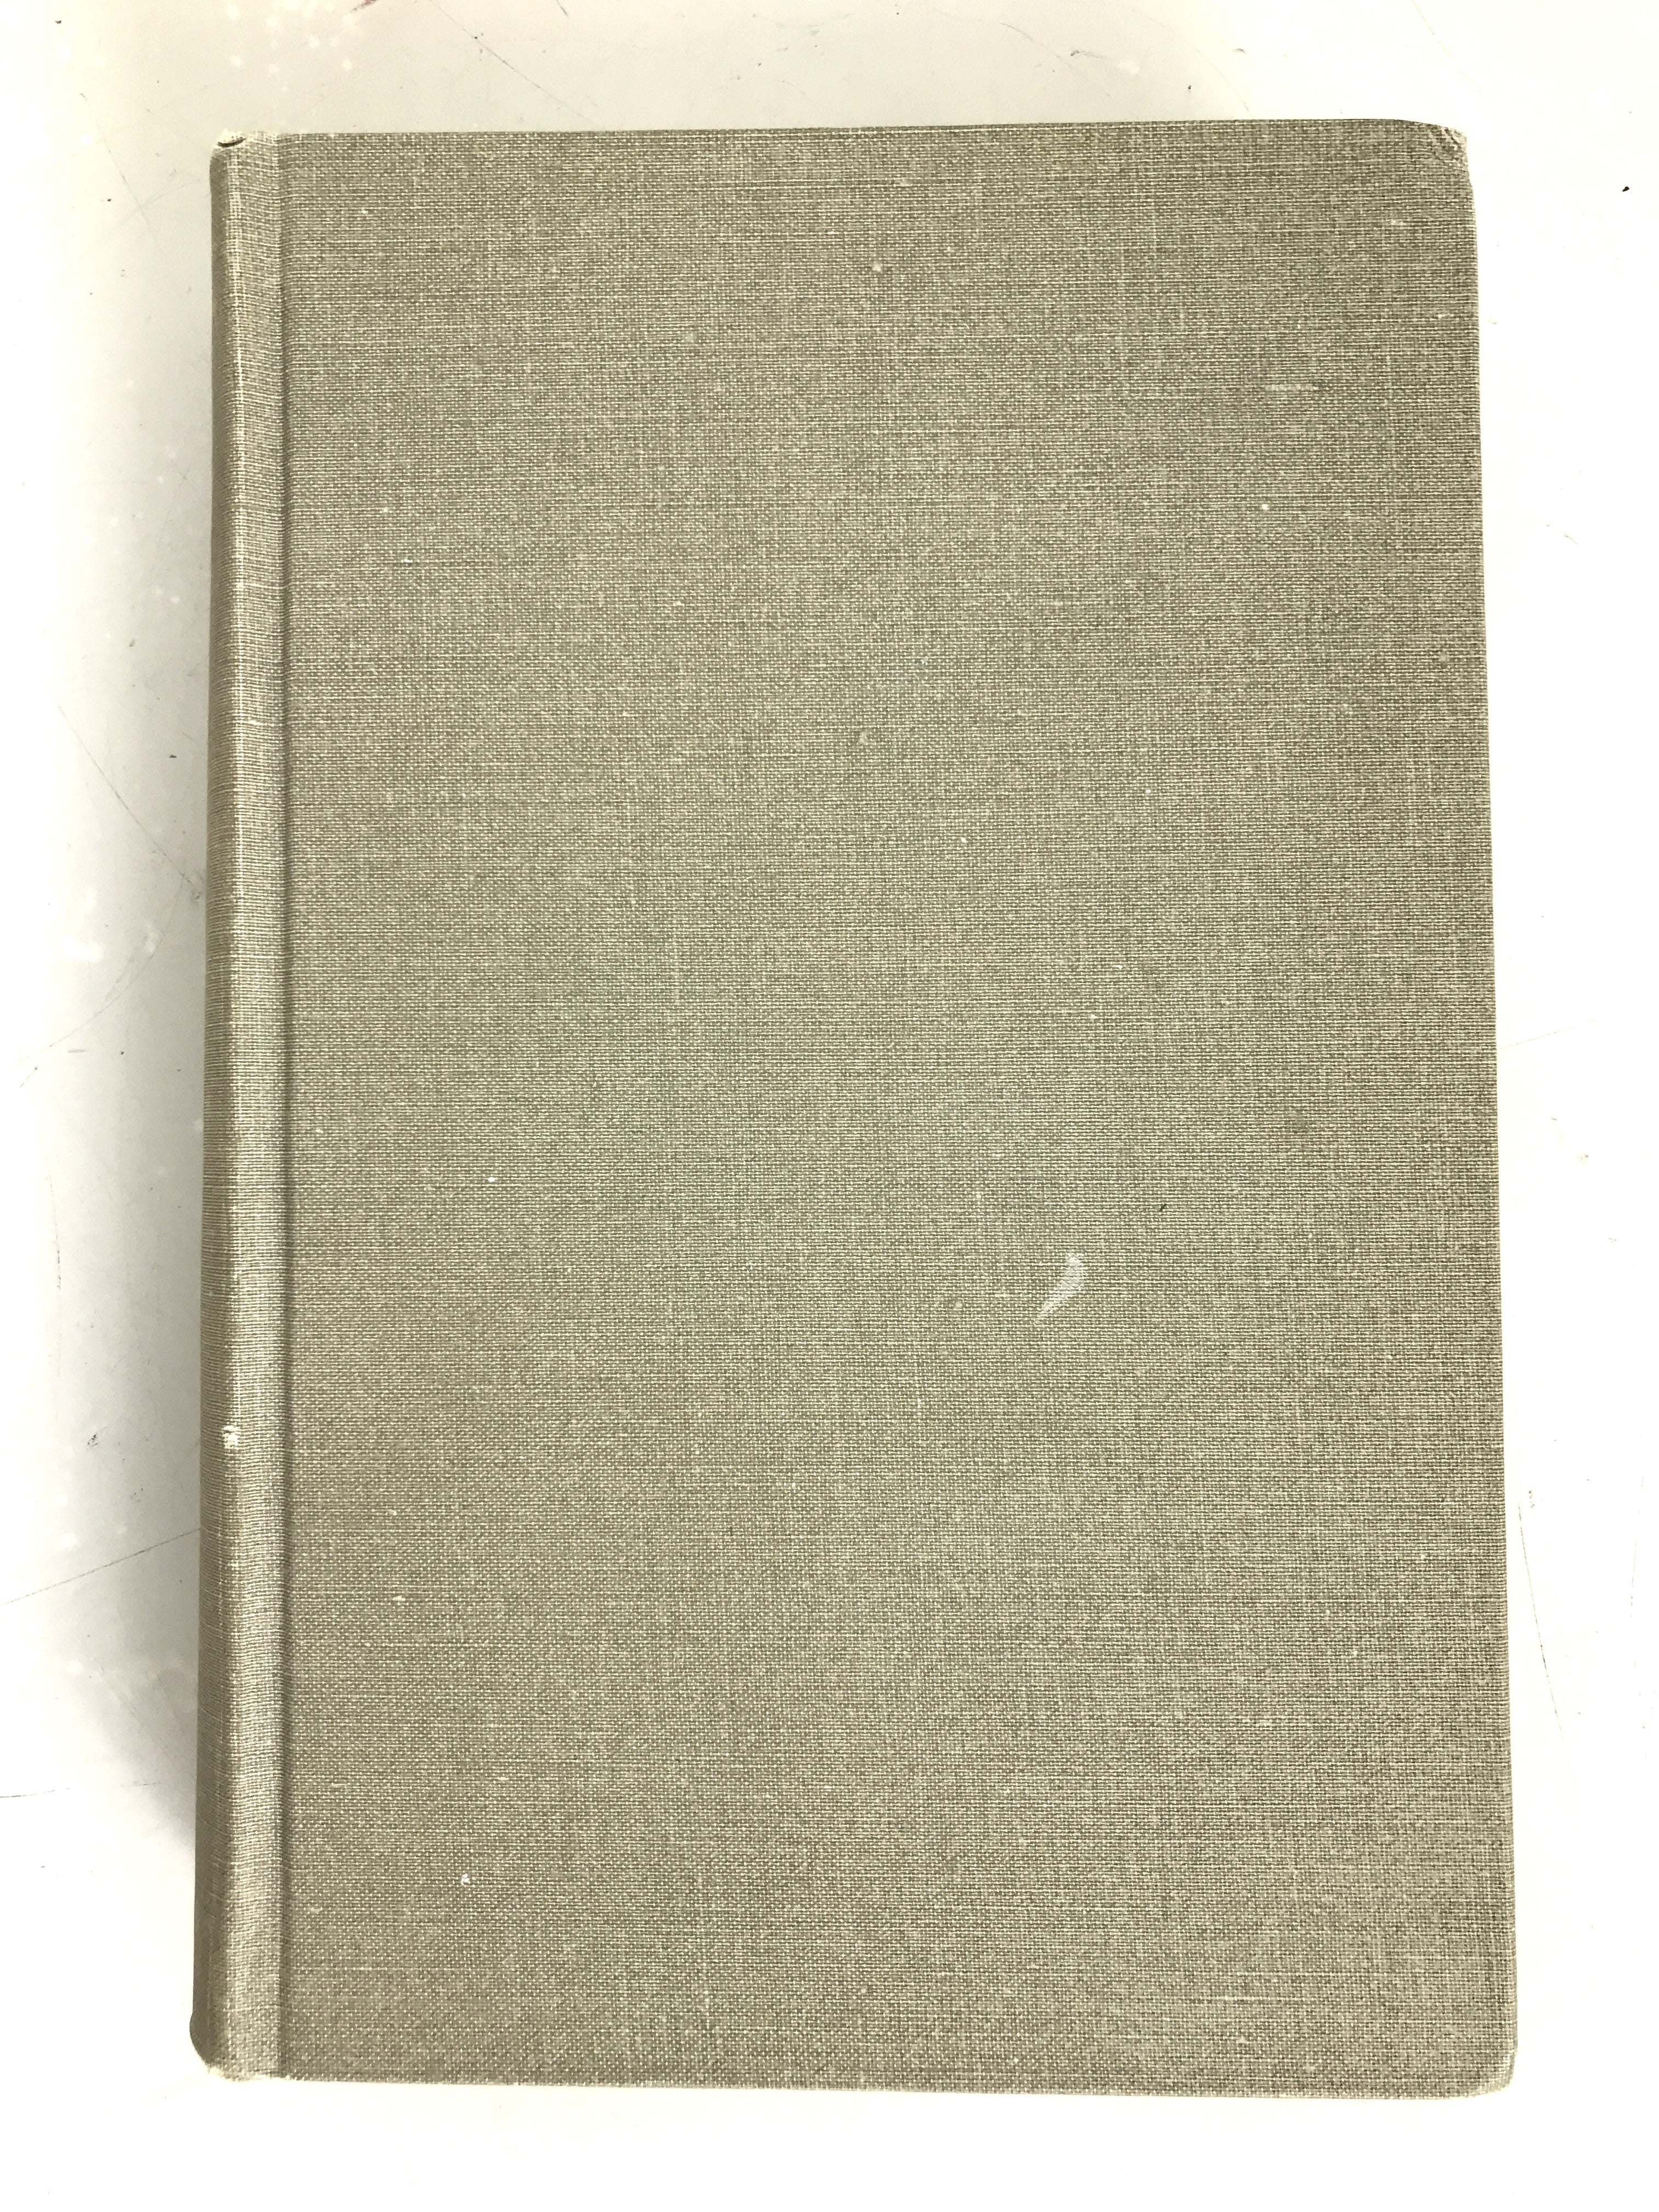 The Exploitation of Natural Animal Populations Le Cren and Holdgate 1962 HC